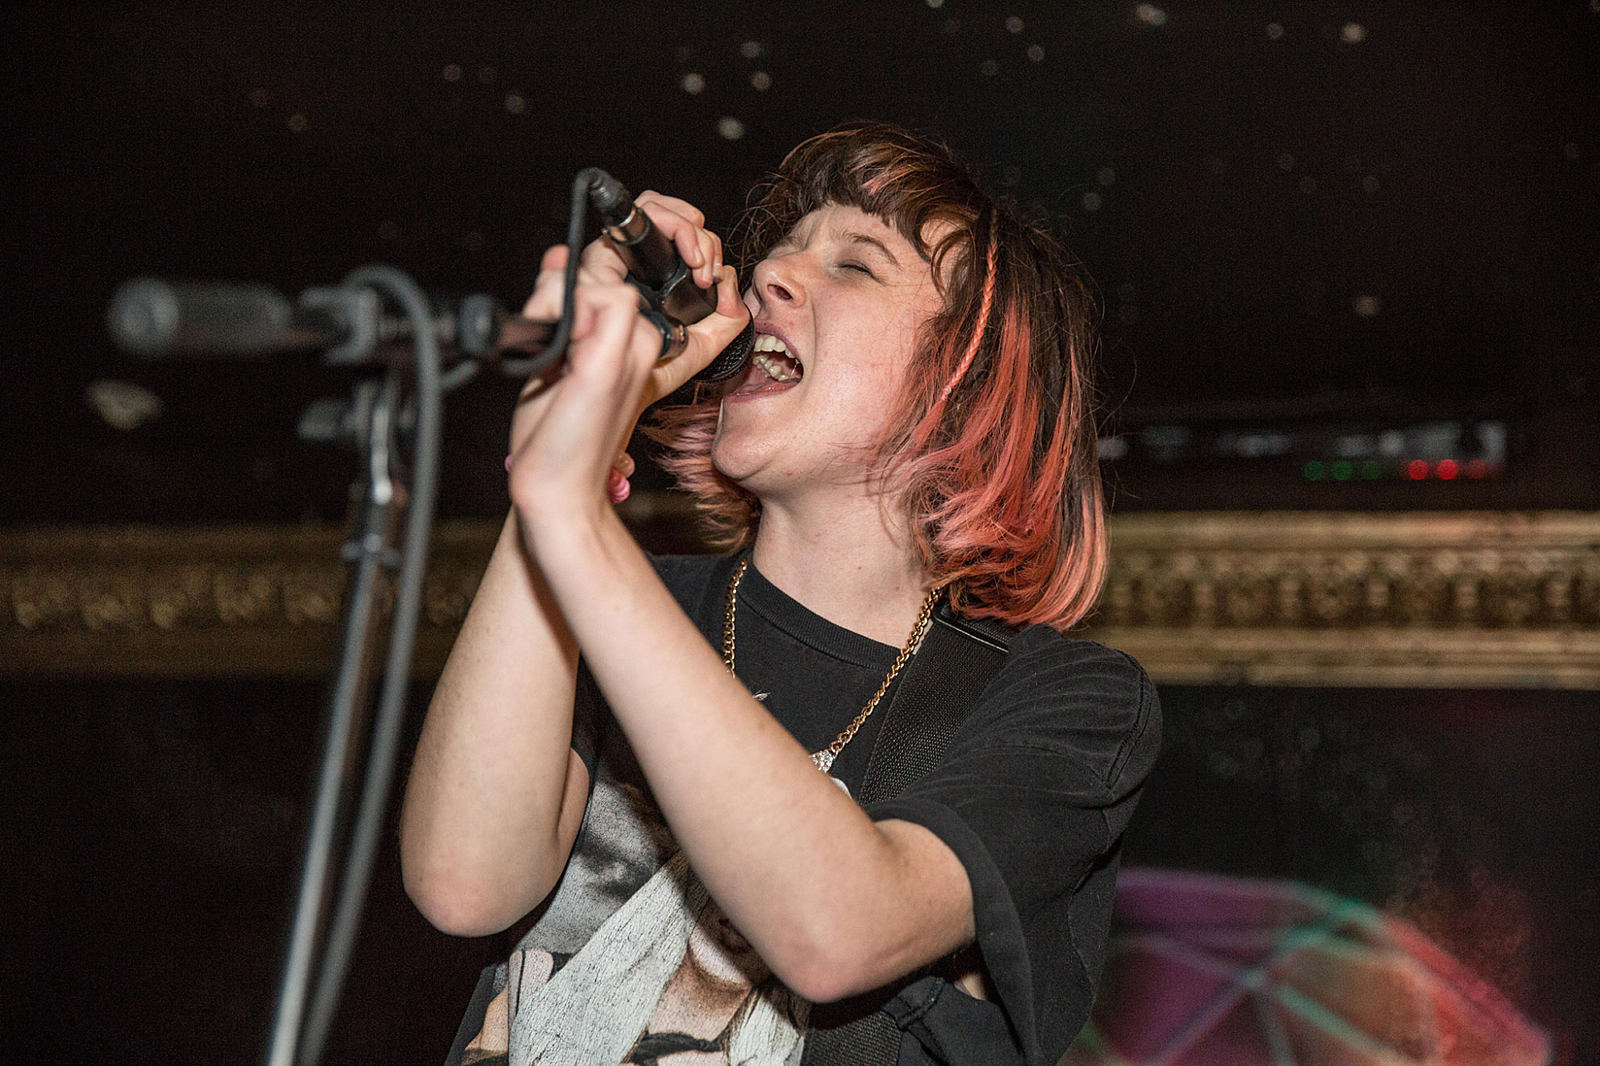 Dilly Dally, Palma Violets, The Big Moon join Sound City bill